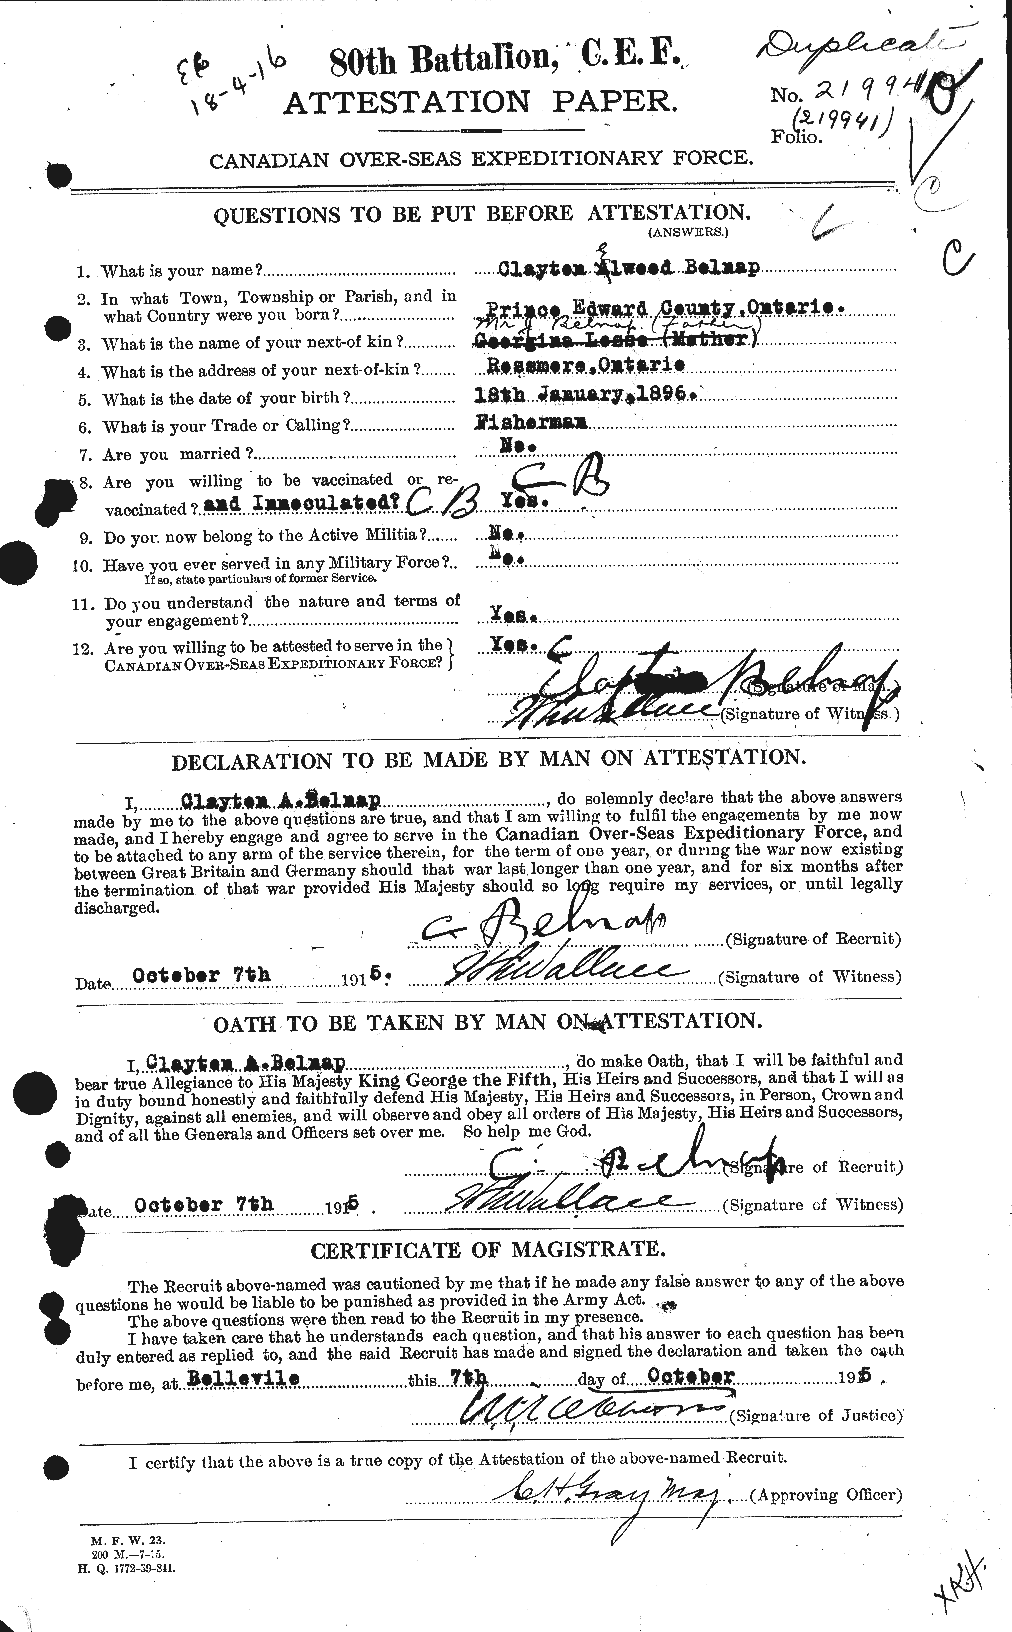 Personnel Records of the First World War - CEF 233593a